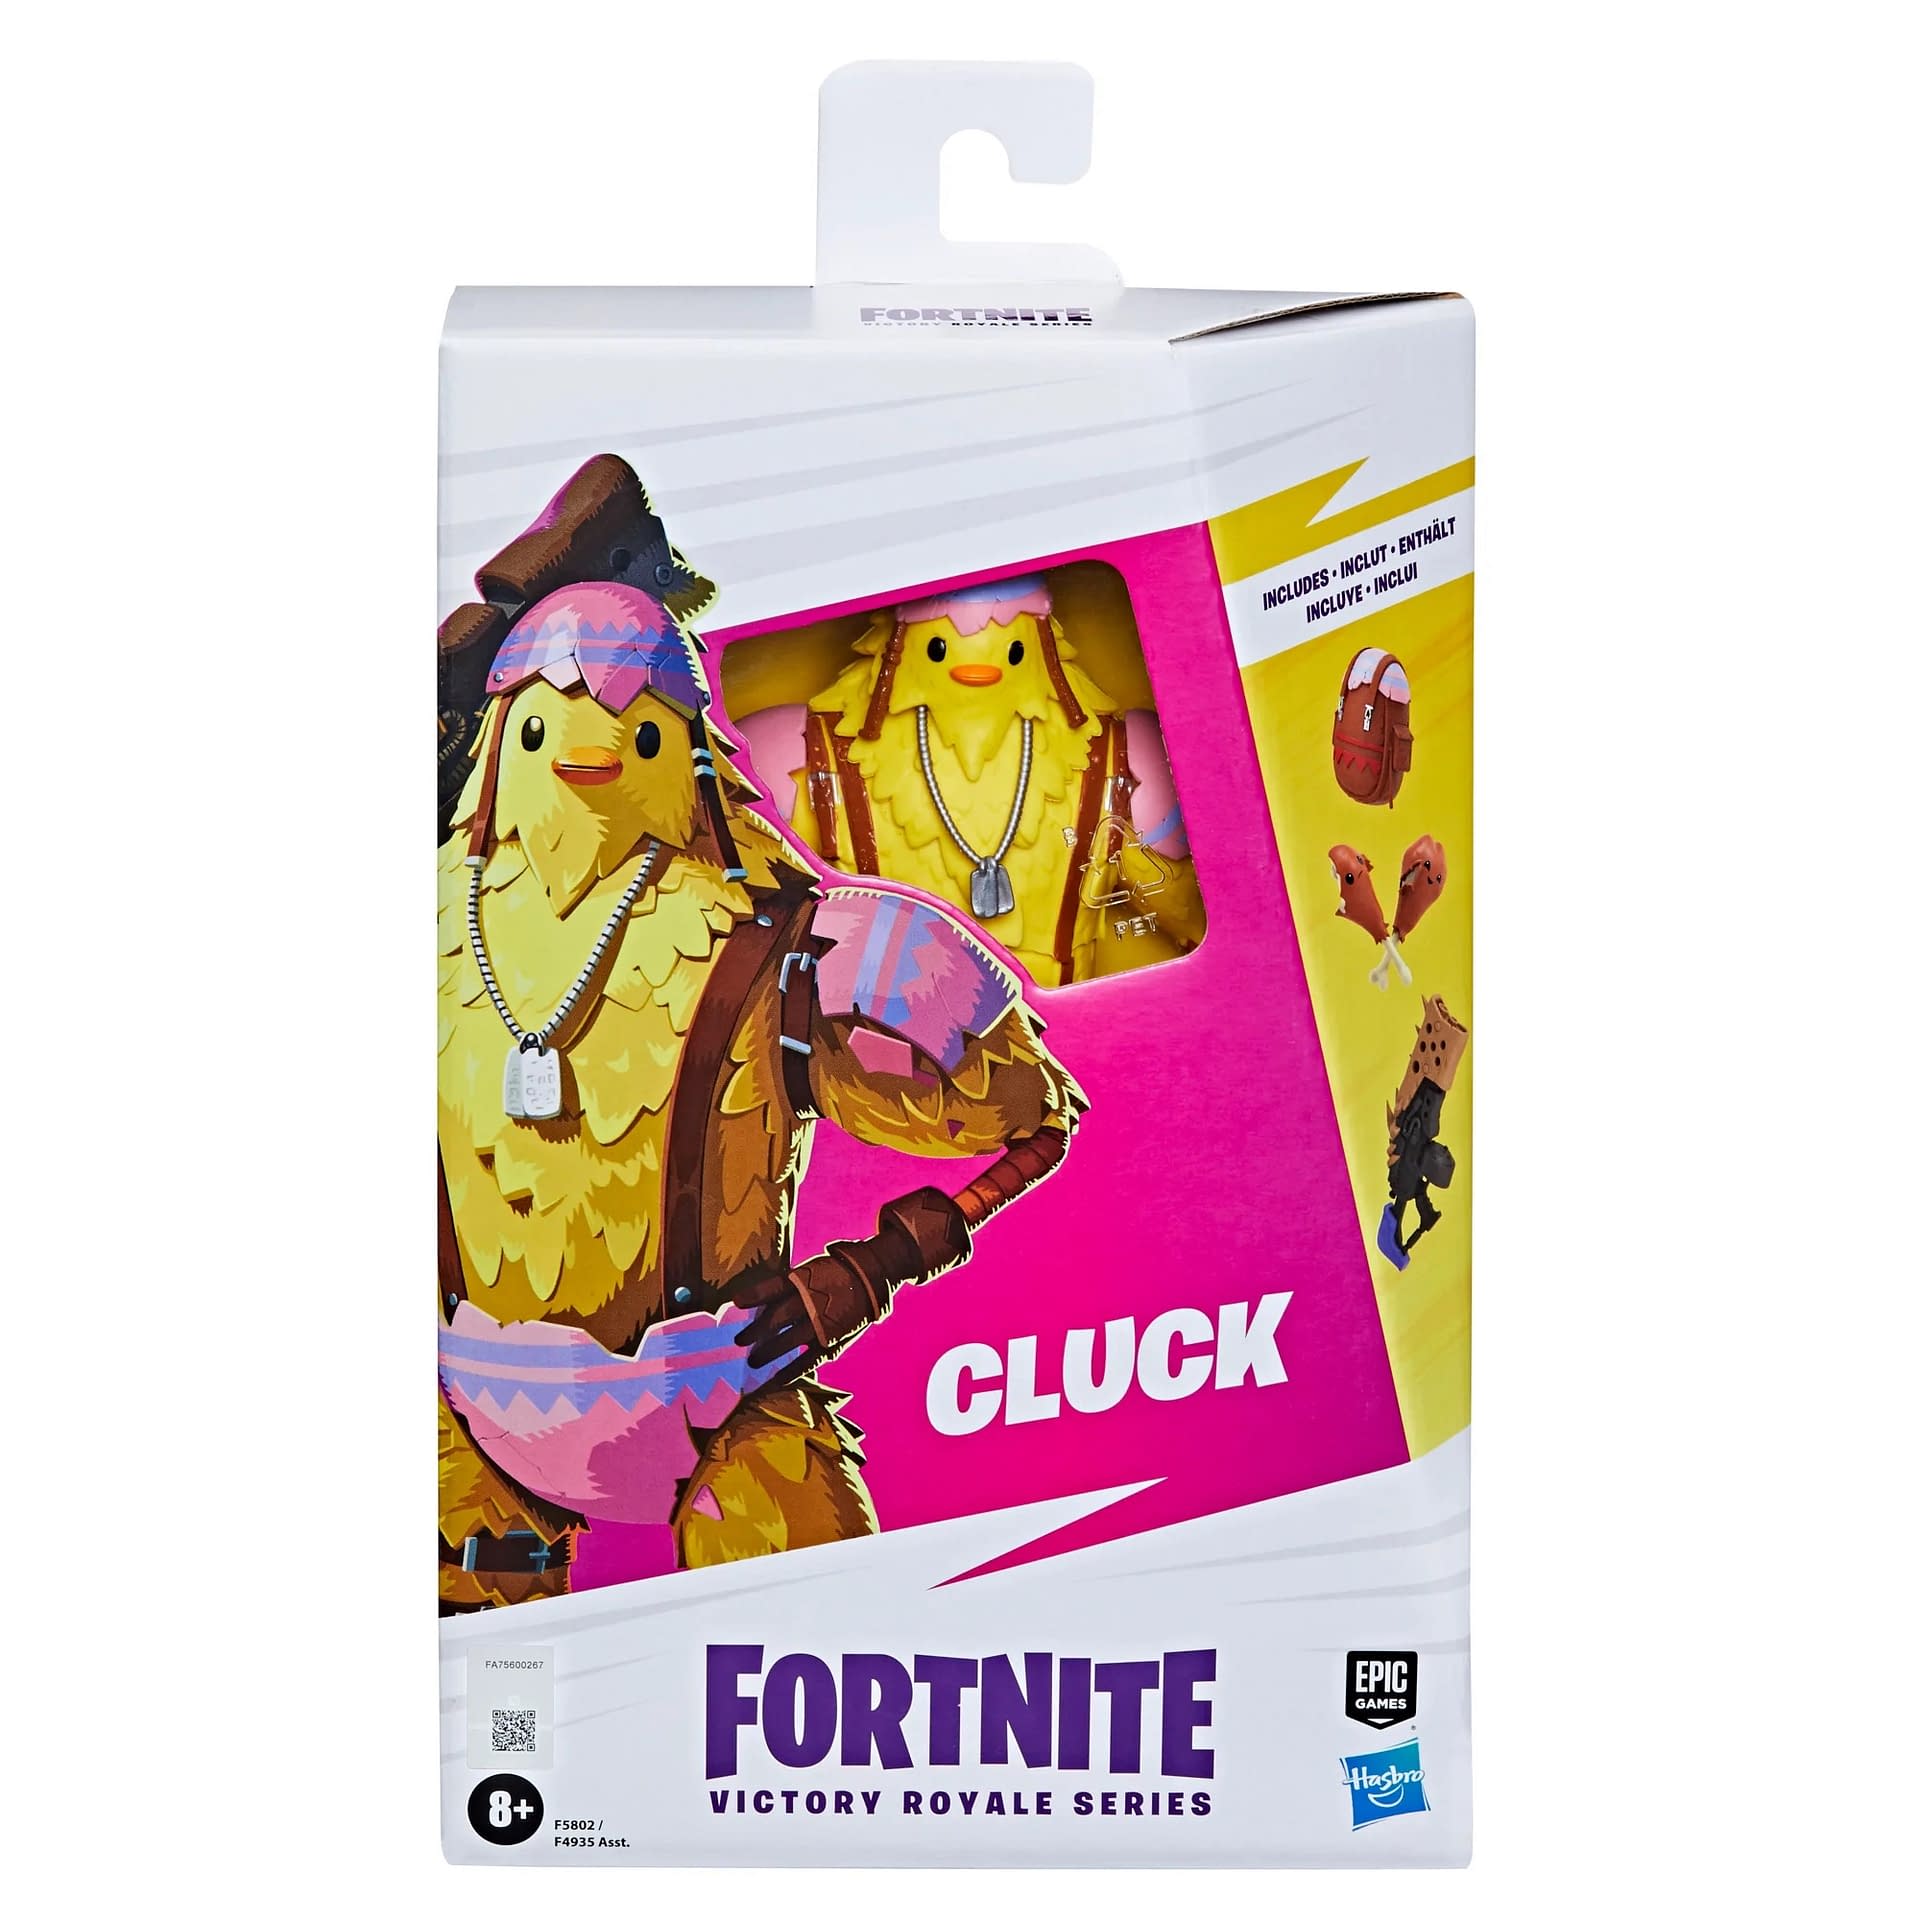 Fortnite's Cluck Wants A Crispy Victory Royale with HasbroFigure